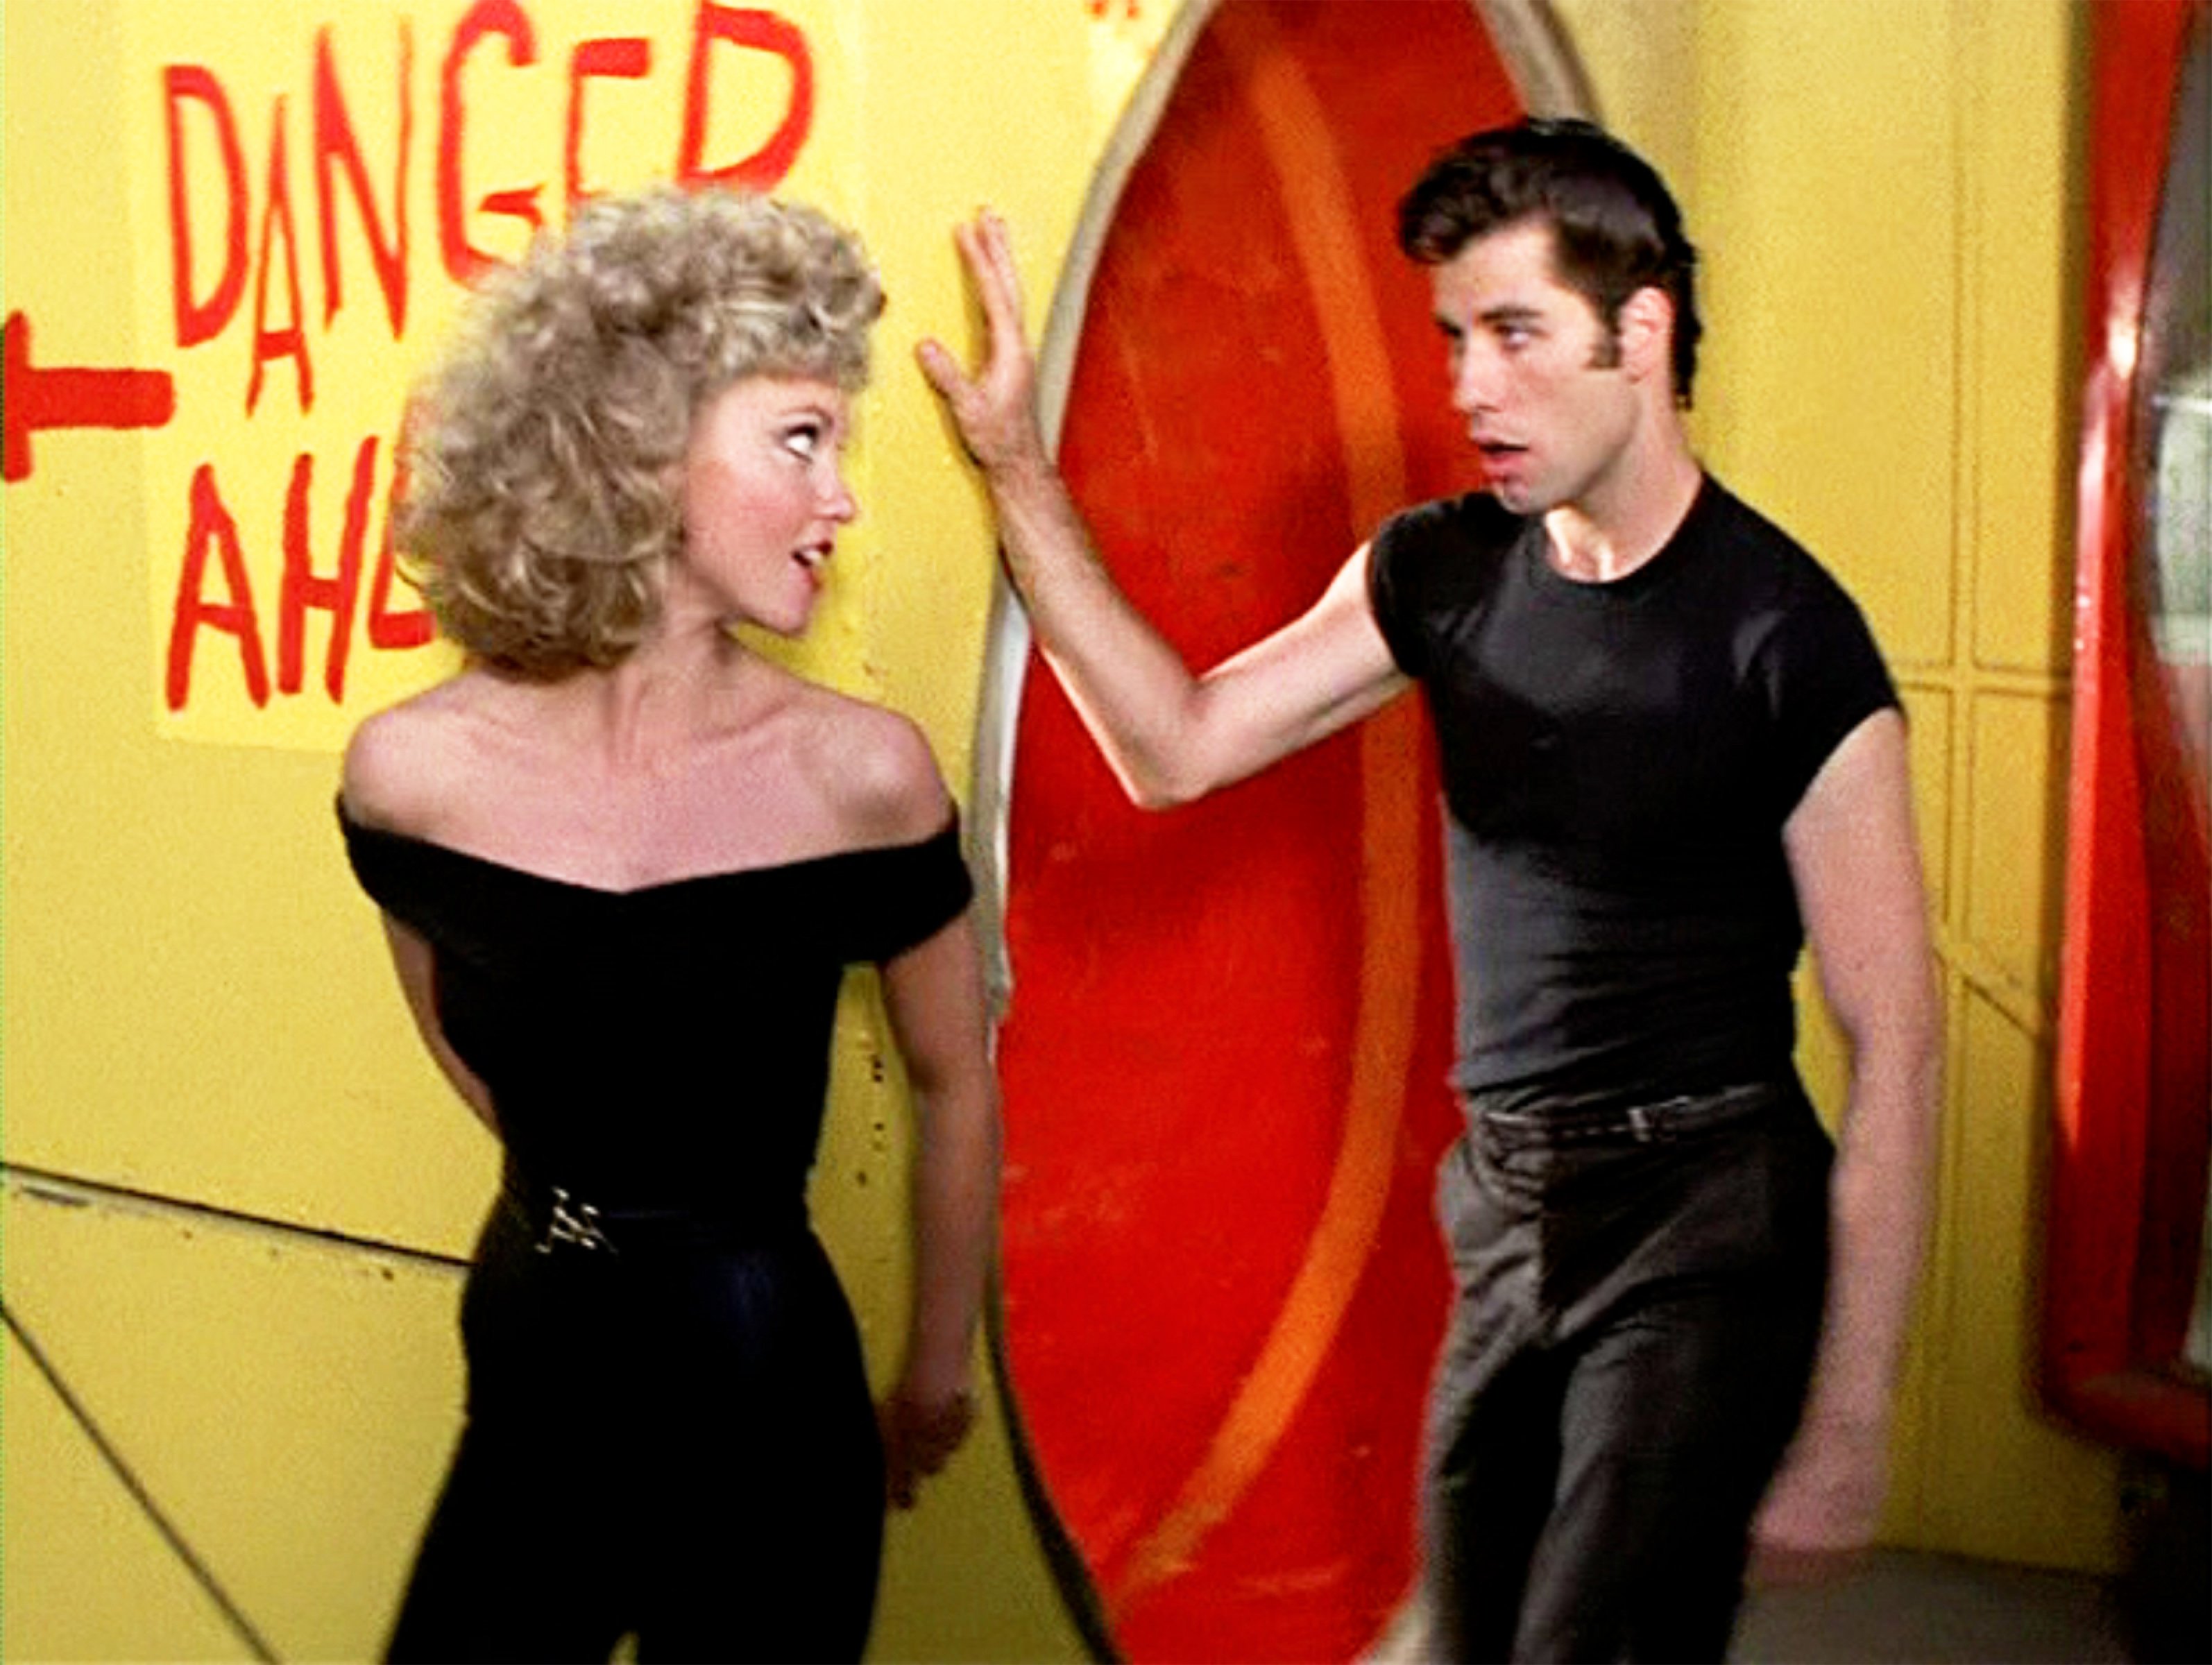 Olivia Newton-John as Sandy Olsson and John Travolta as Danny Zuko singing "You're the One That I Want," in "Grease" on June 16, 1978. / Source: Getty Images